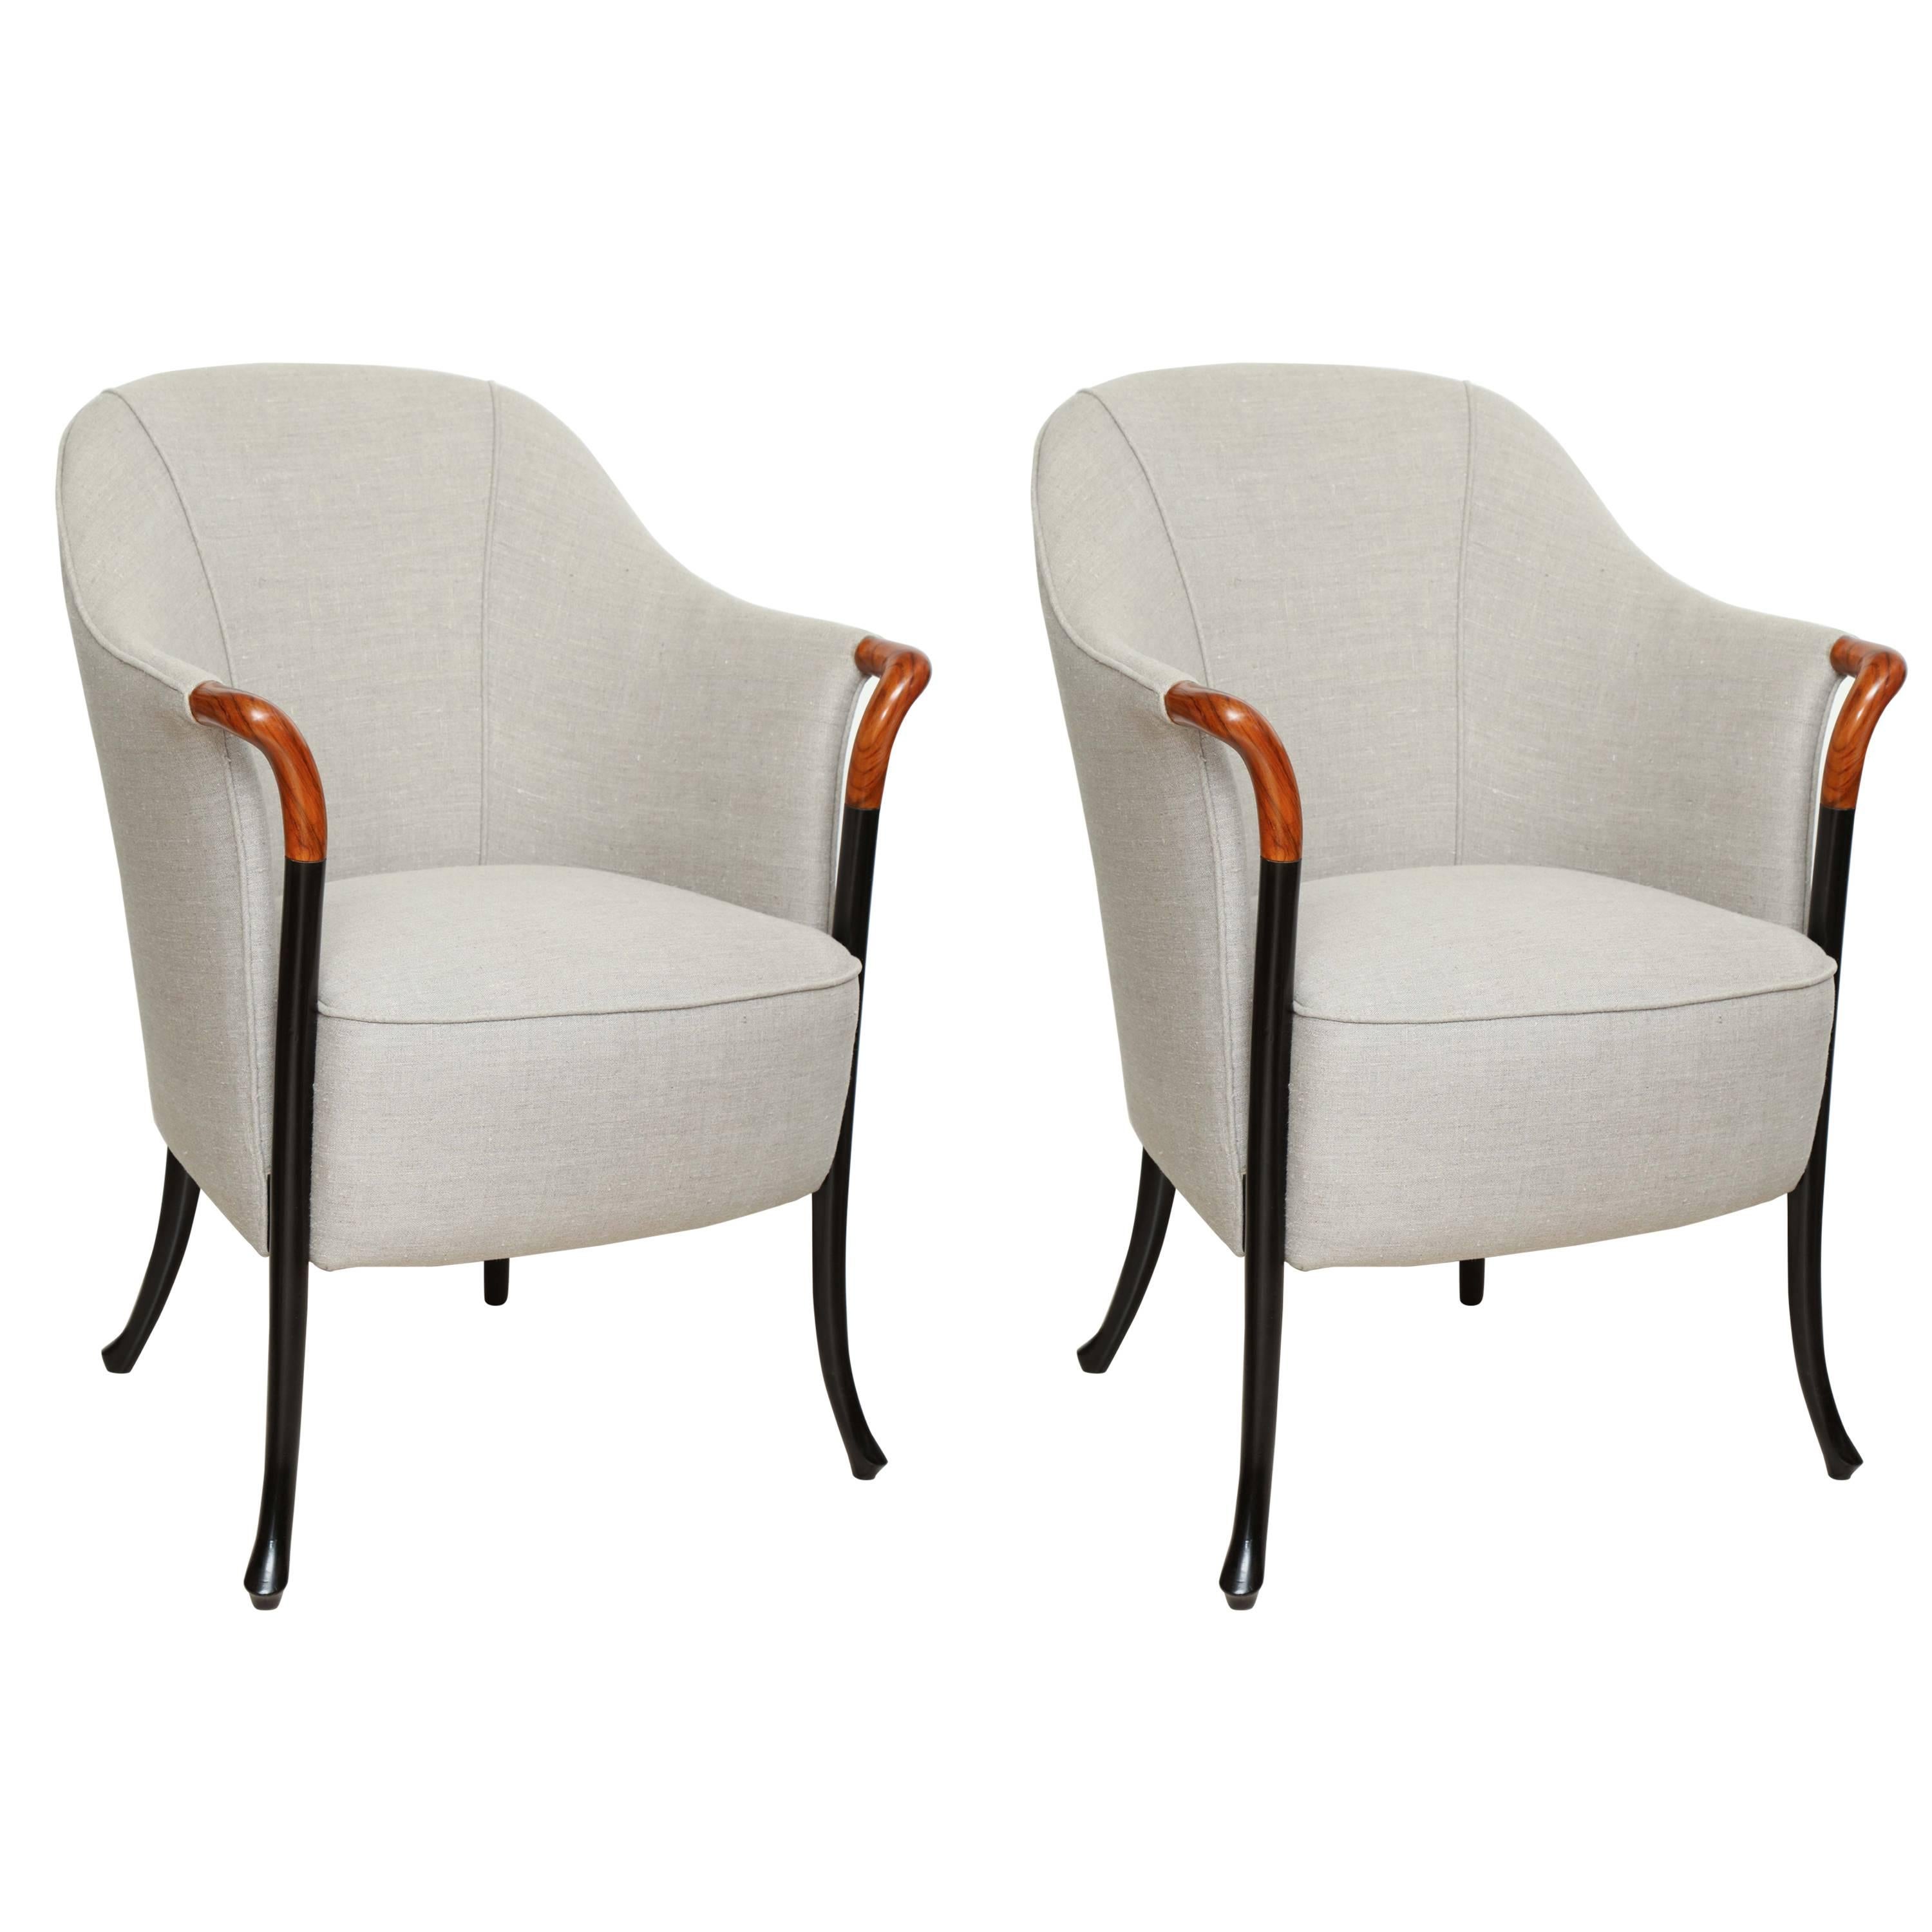 Pair of Giorgetti Progetti Upholstered Armchairs with Lacquered Legs